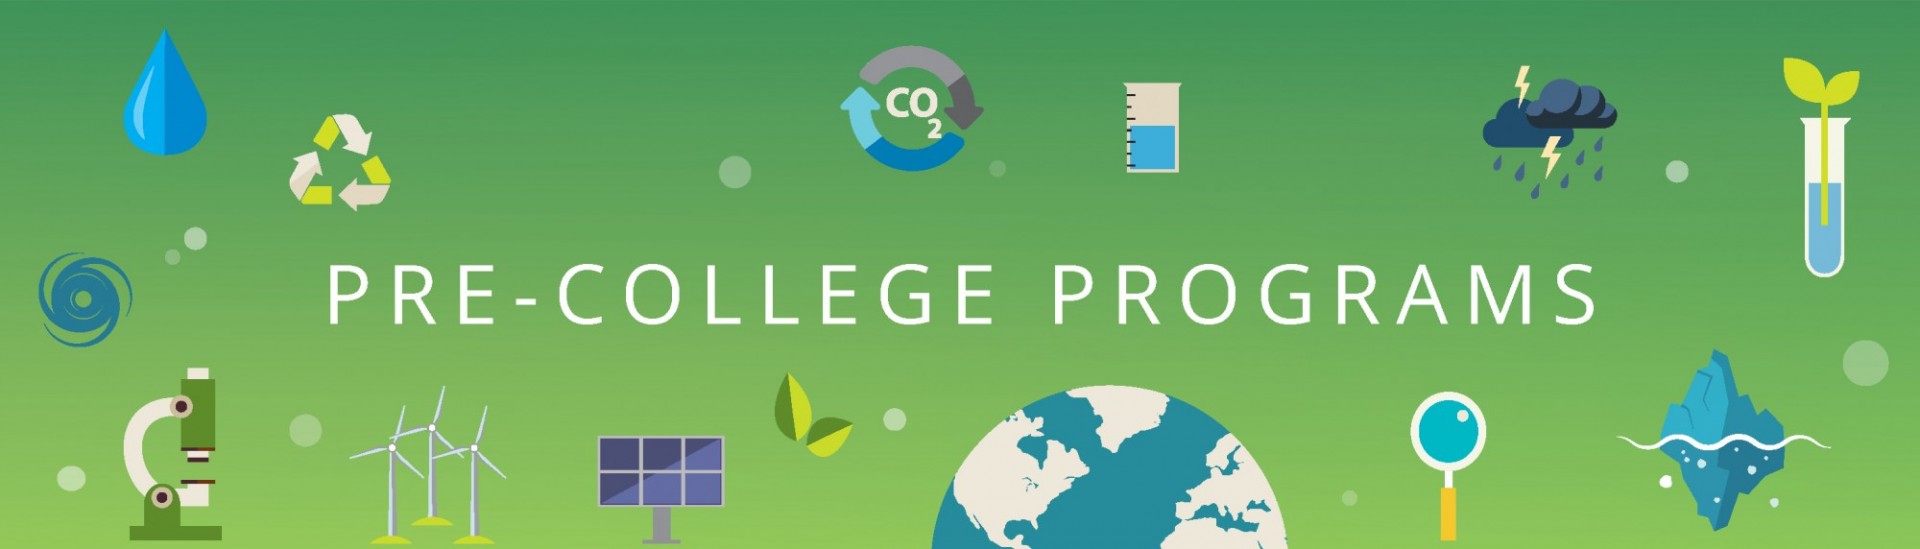 green background with science graphics, "pre-college programs" in white text